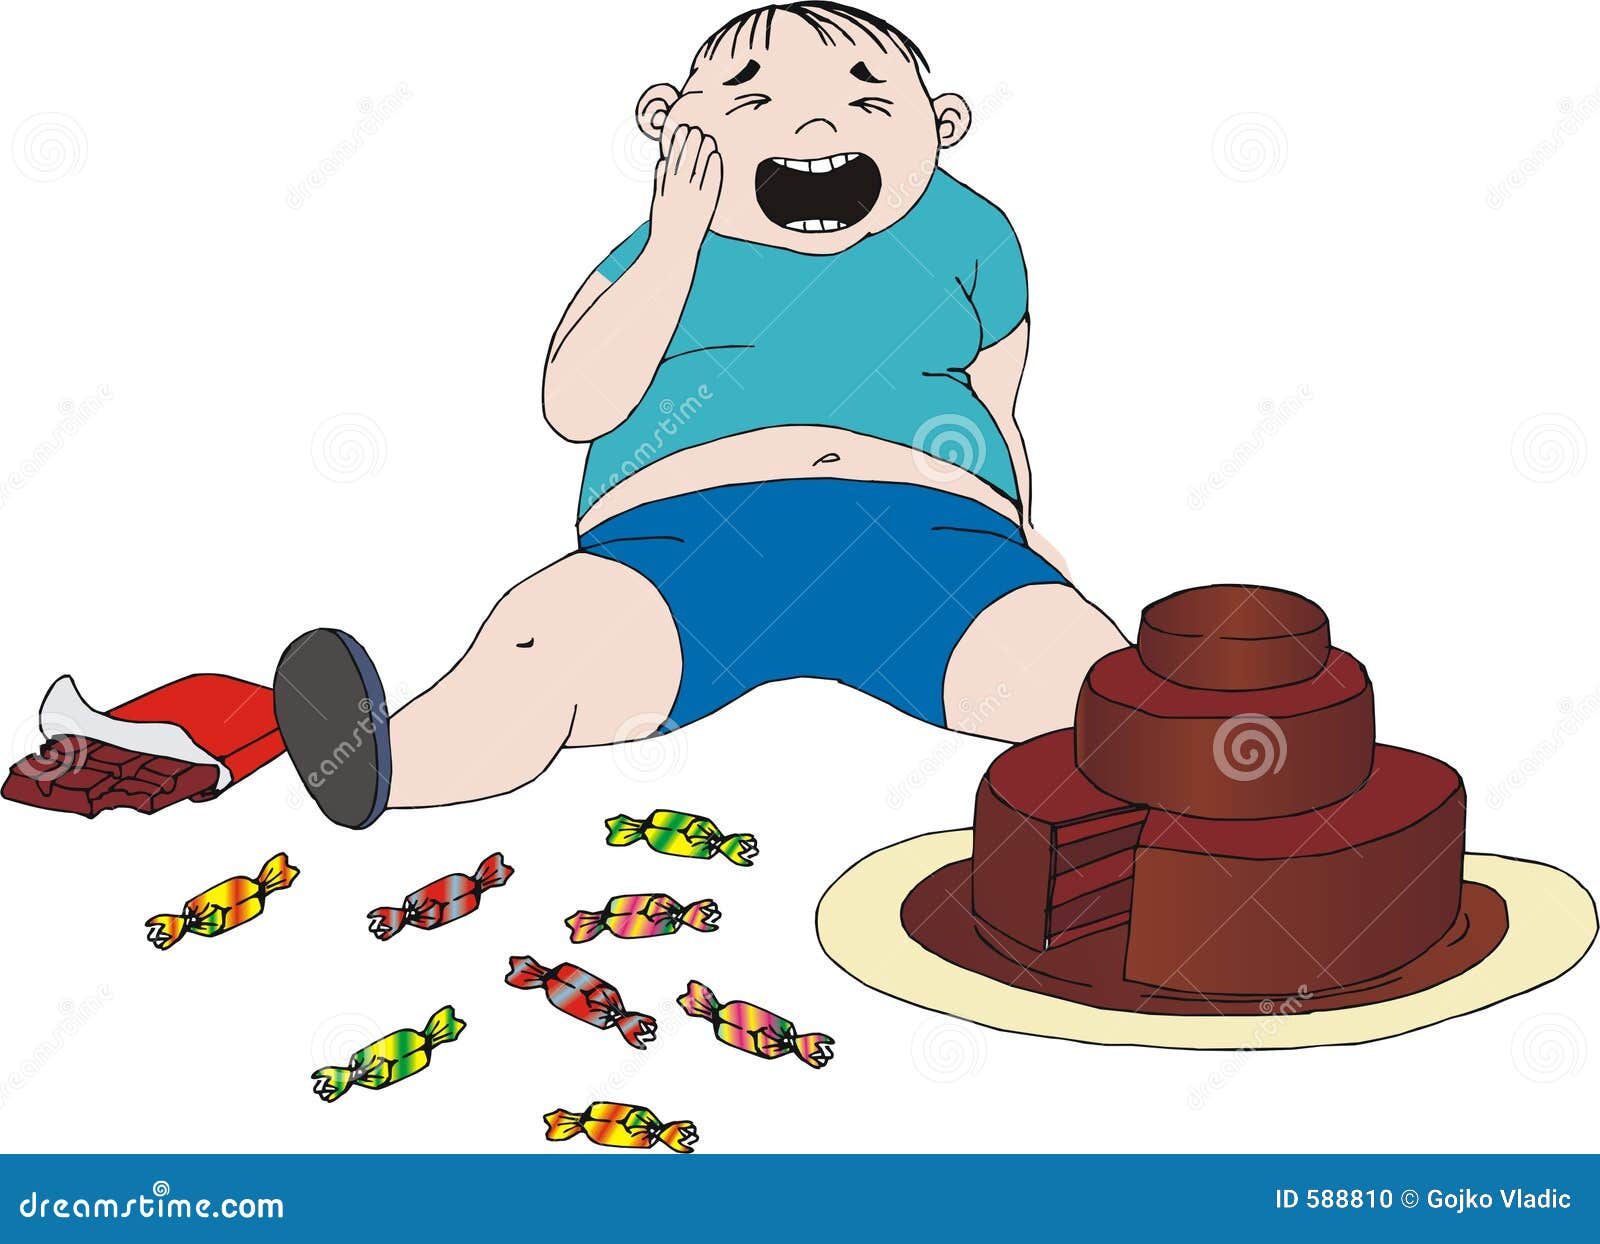 toothache clipart - photo #13